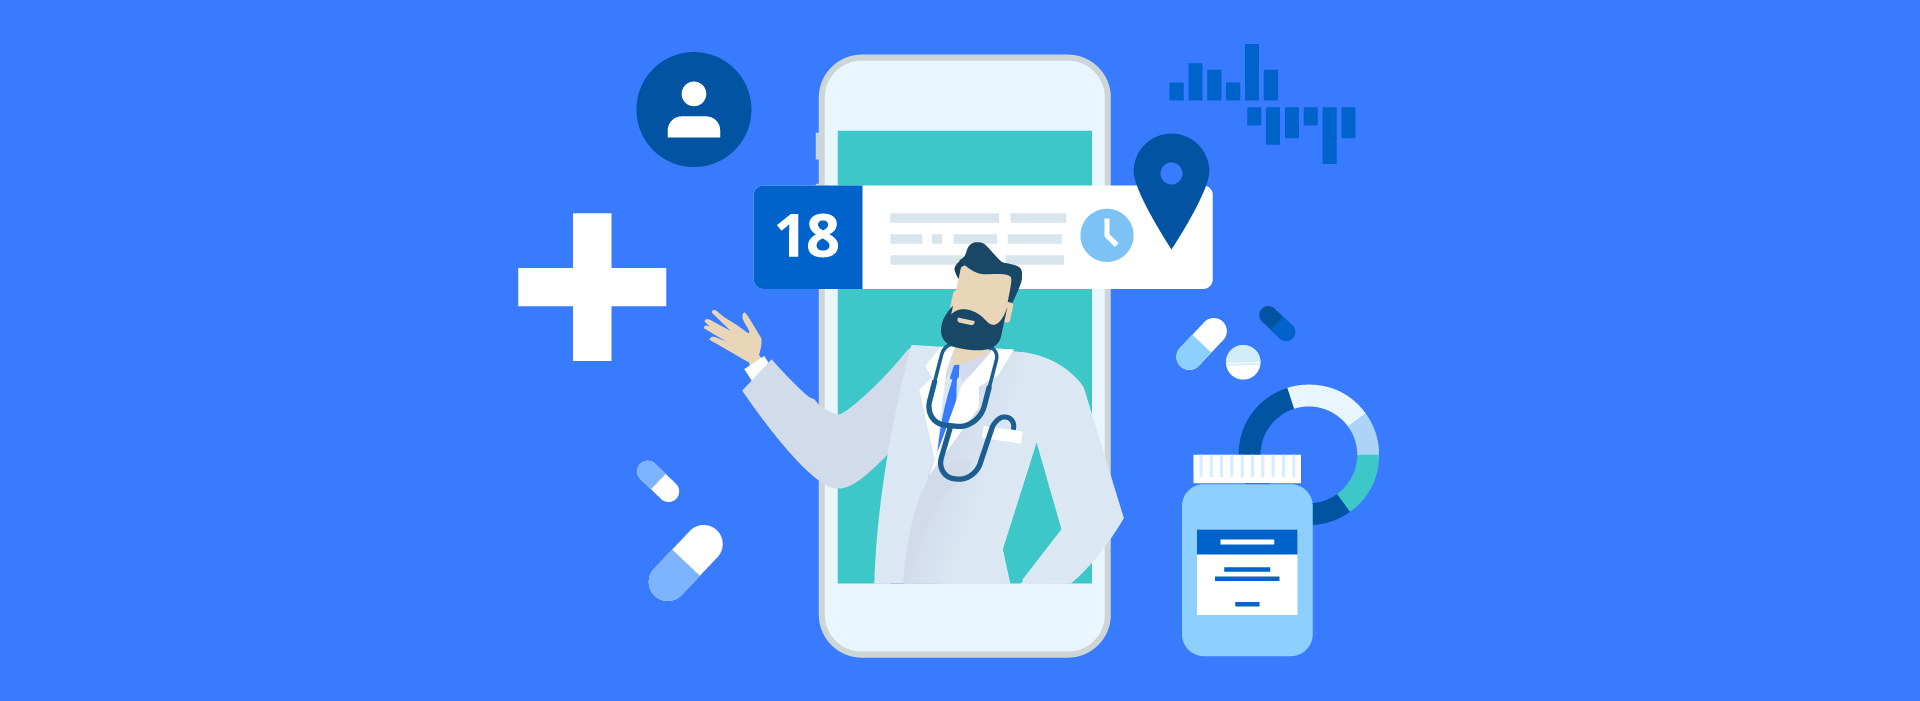 Trending mobile app ideas with health care apps (mHealth)